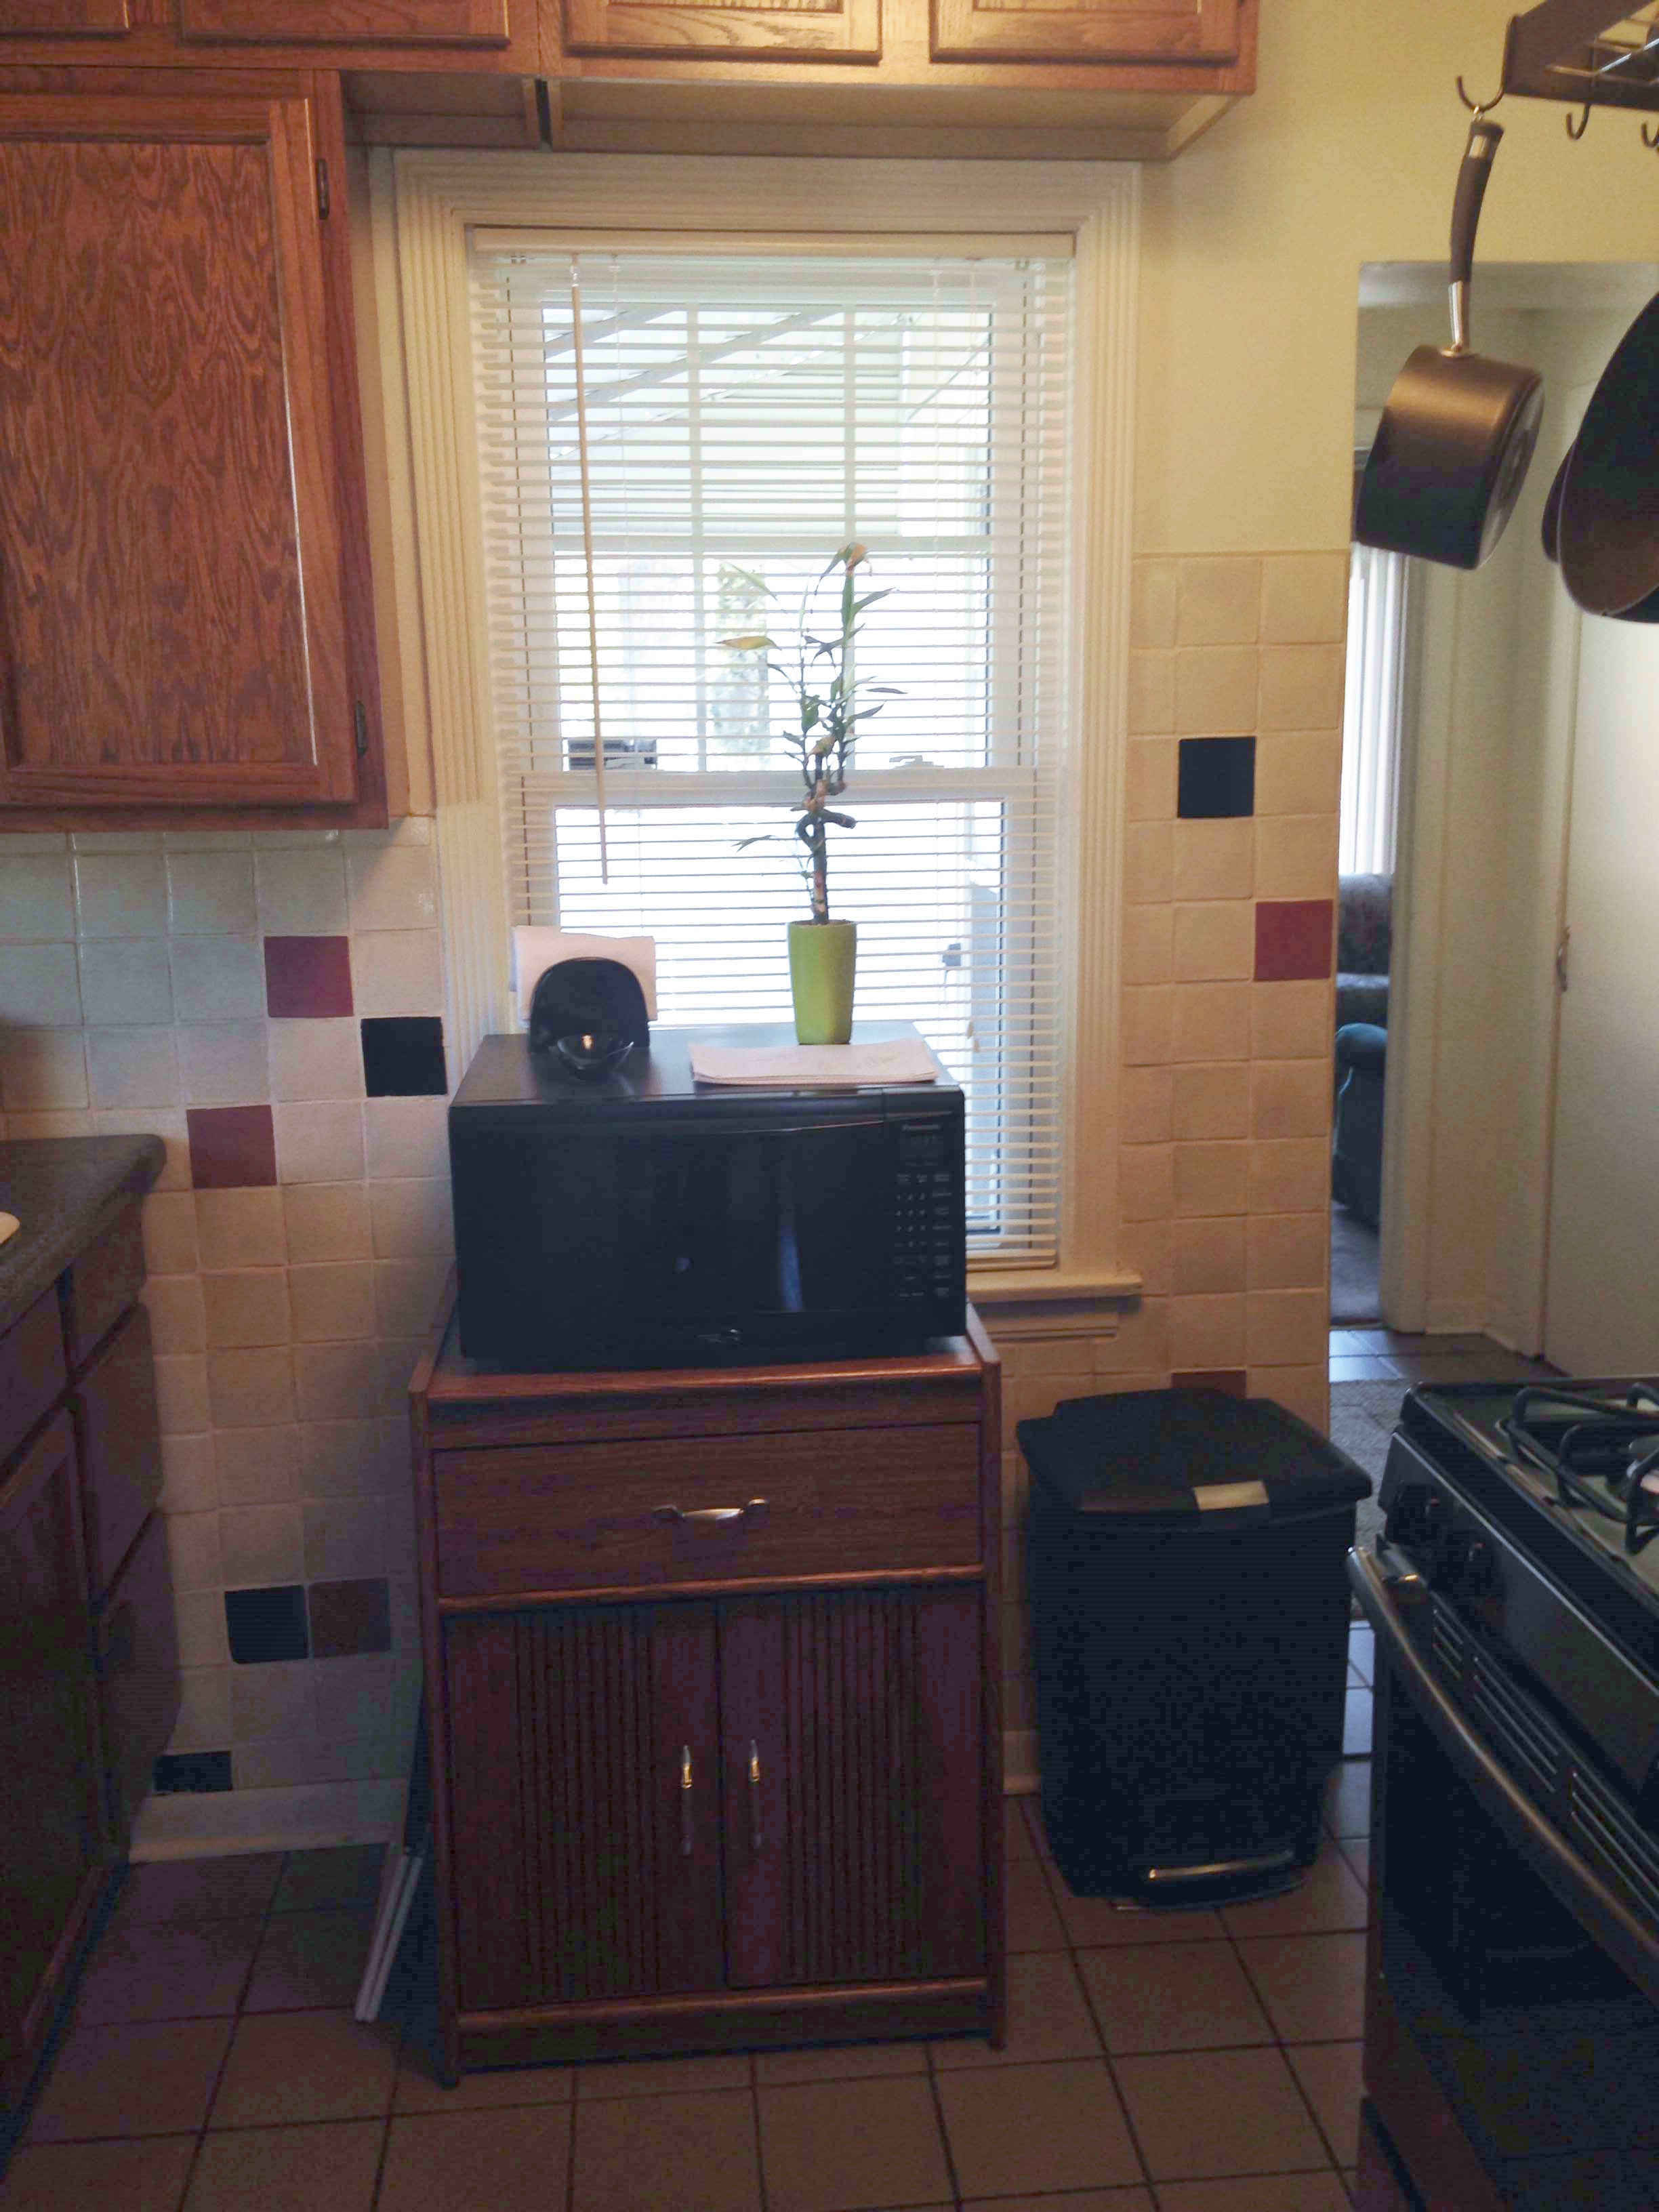 kitchen before and after photo